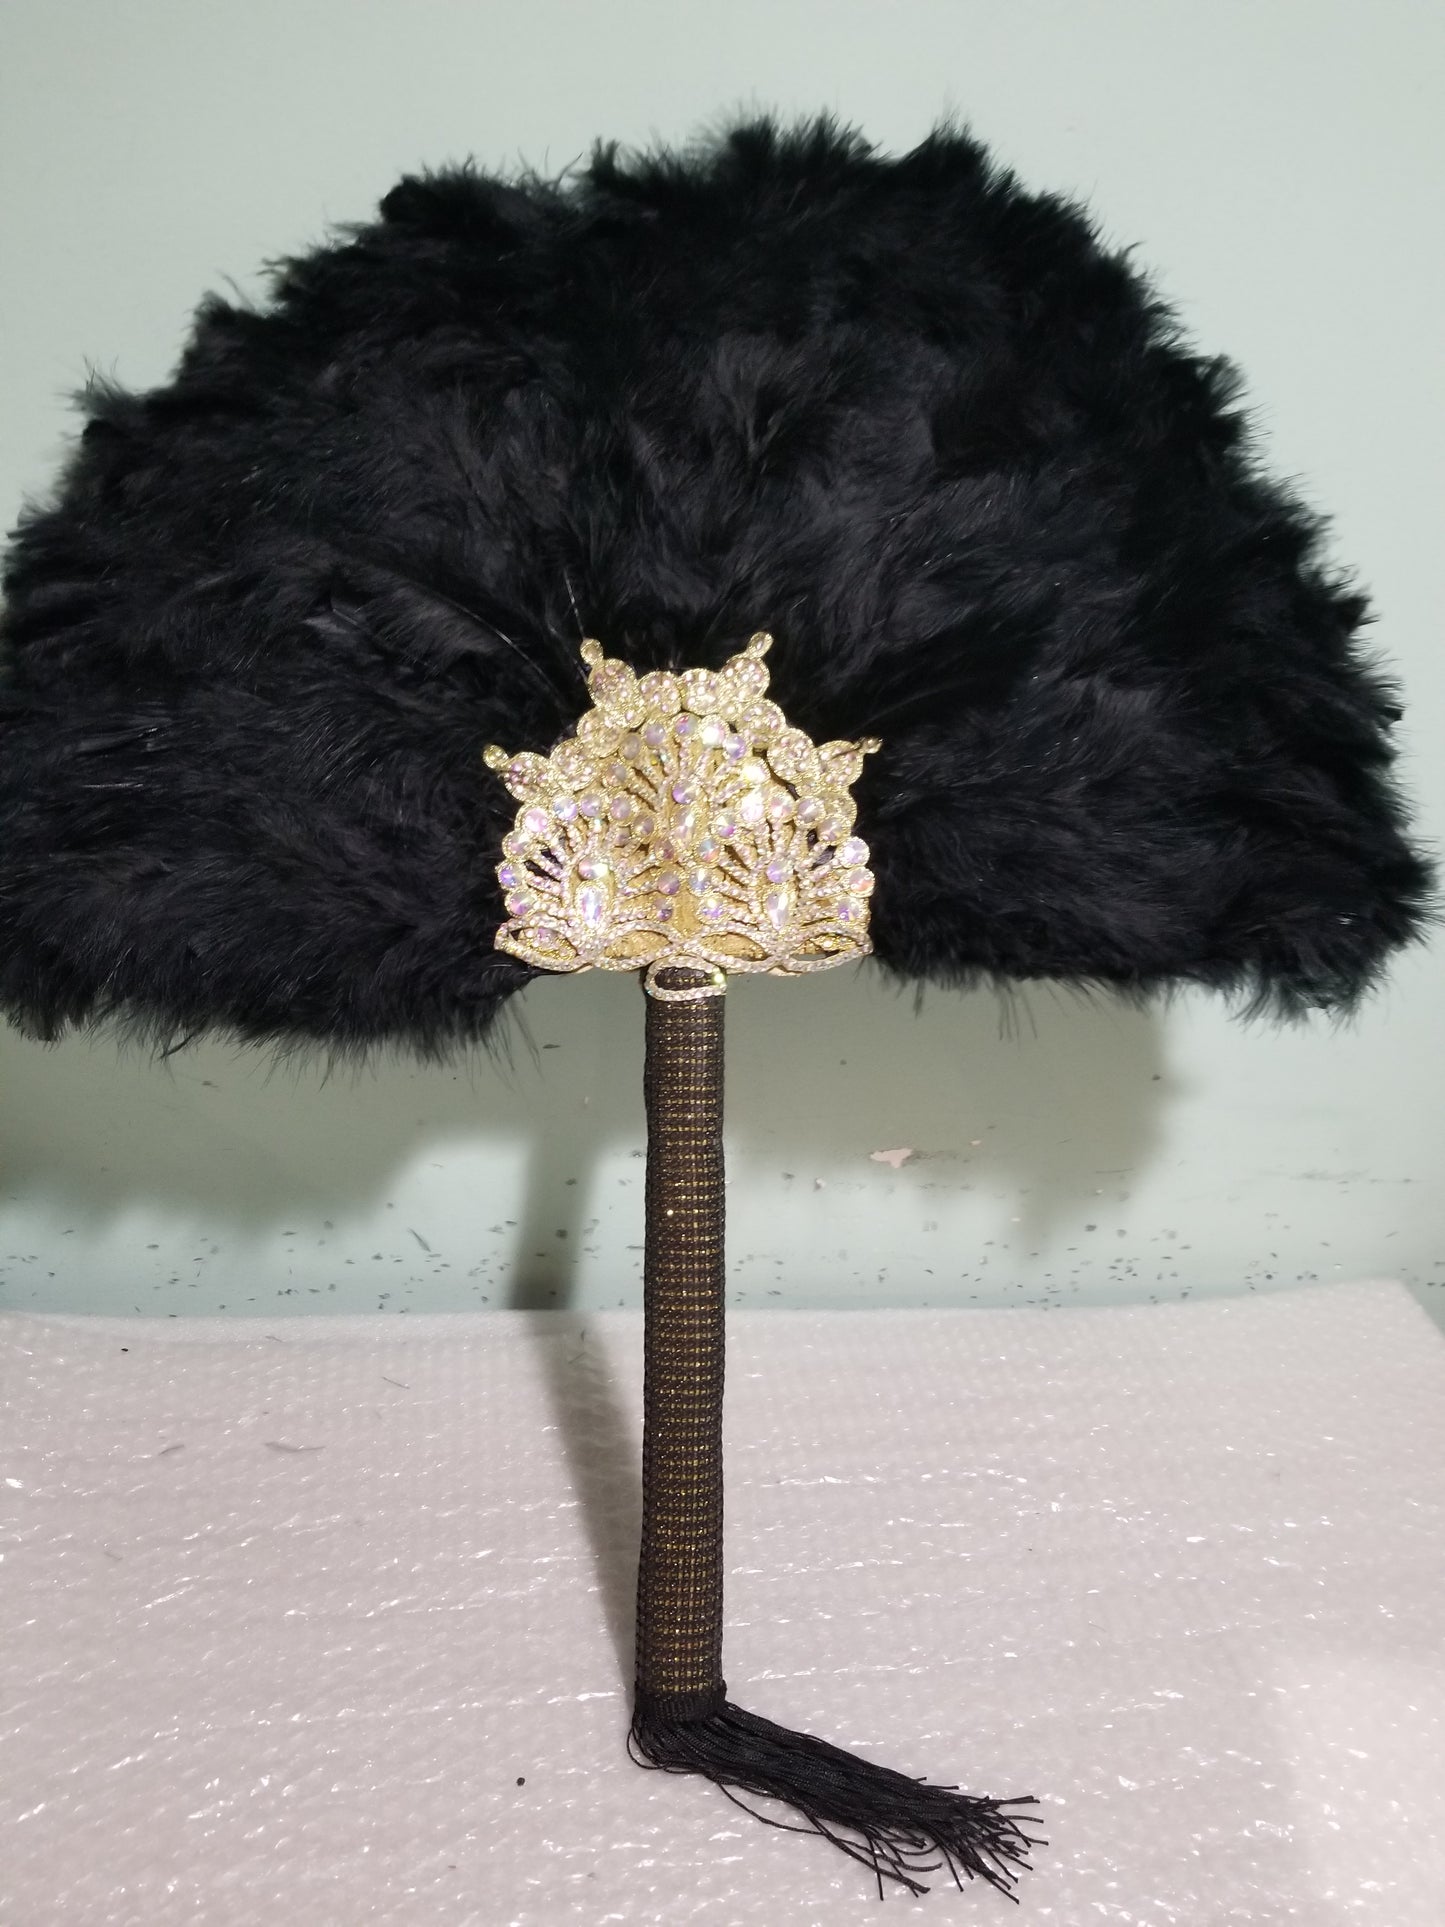 Black/Gold, Nigerian hand made Feather hand fan. Custom made, front/back same design. Large size fluffy feather fan Nigerian Bridal-accessories design with flower petal/stones. long handle with tassles